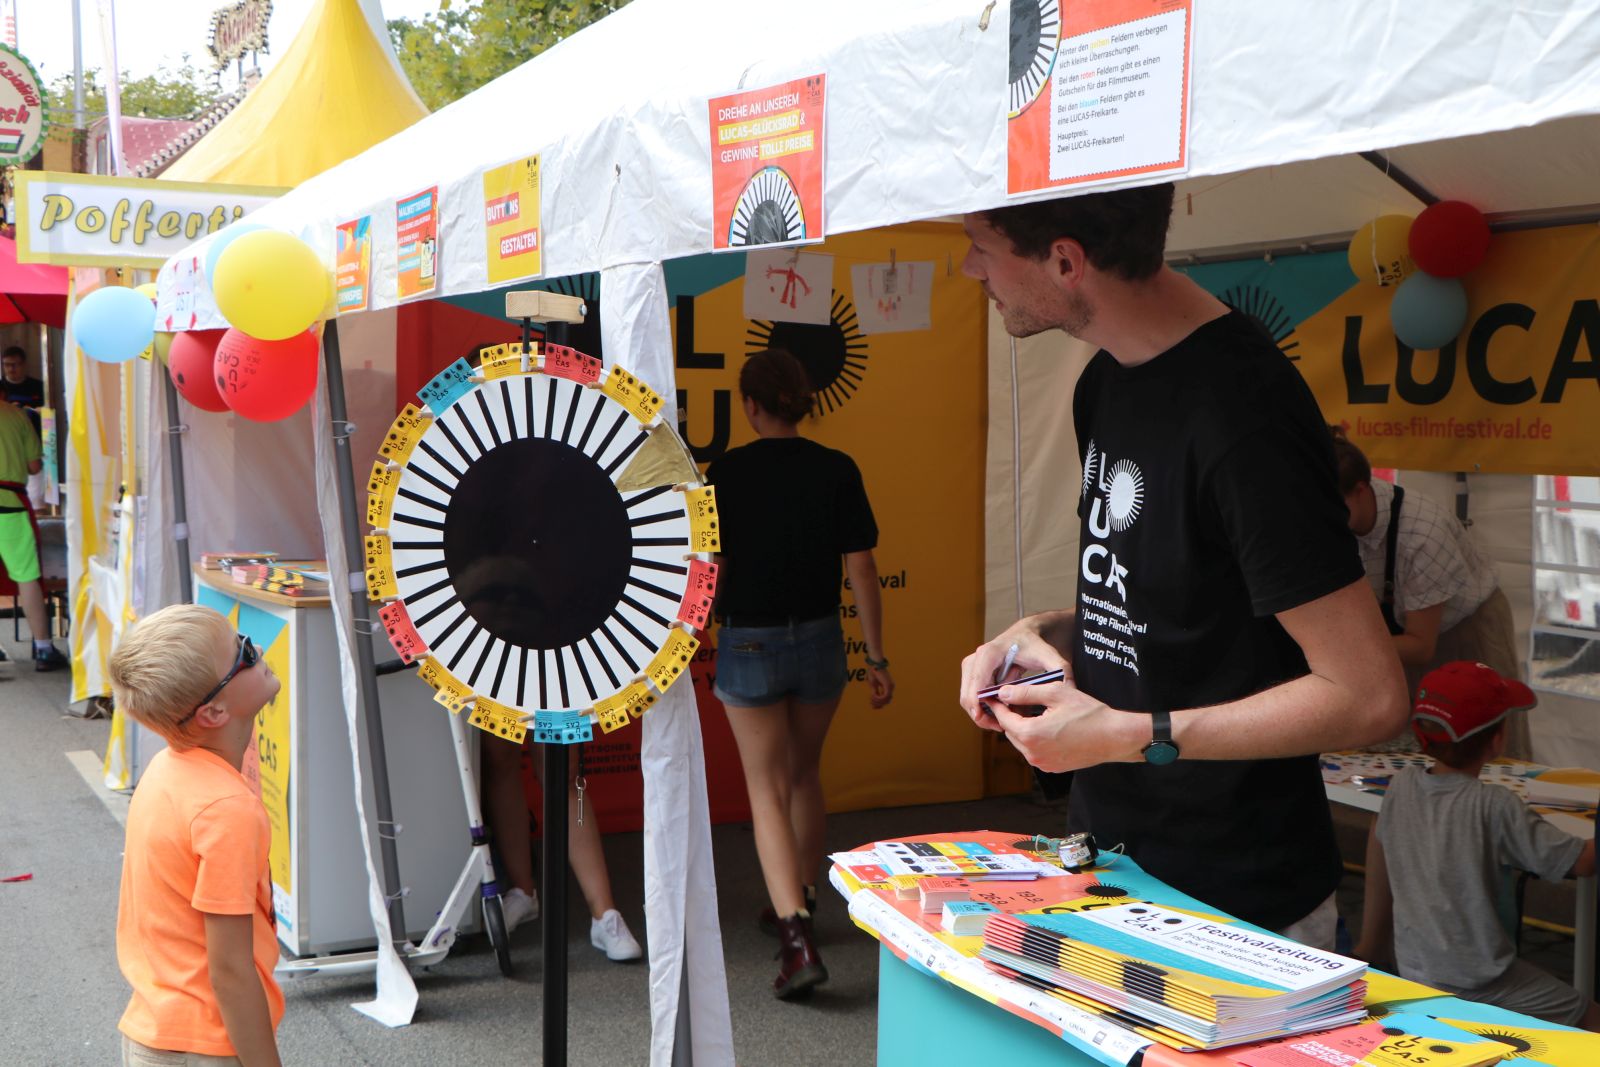 Booth of LUCAS - International Festival for Young Film Fans during the Museum Embankment Festival 2019